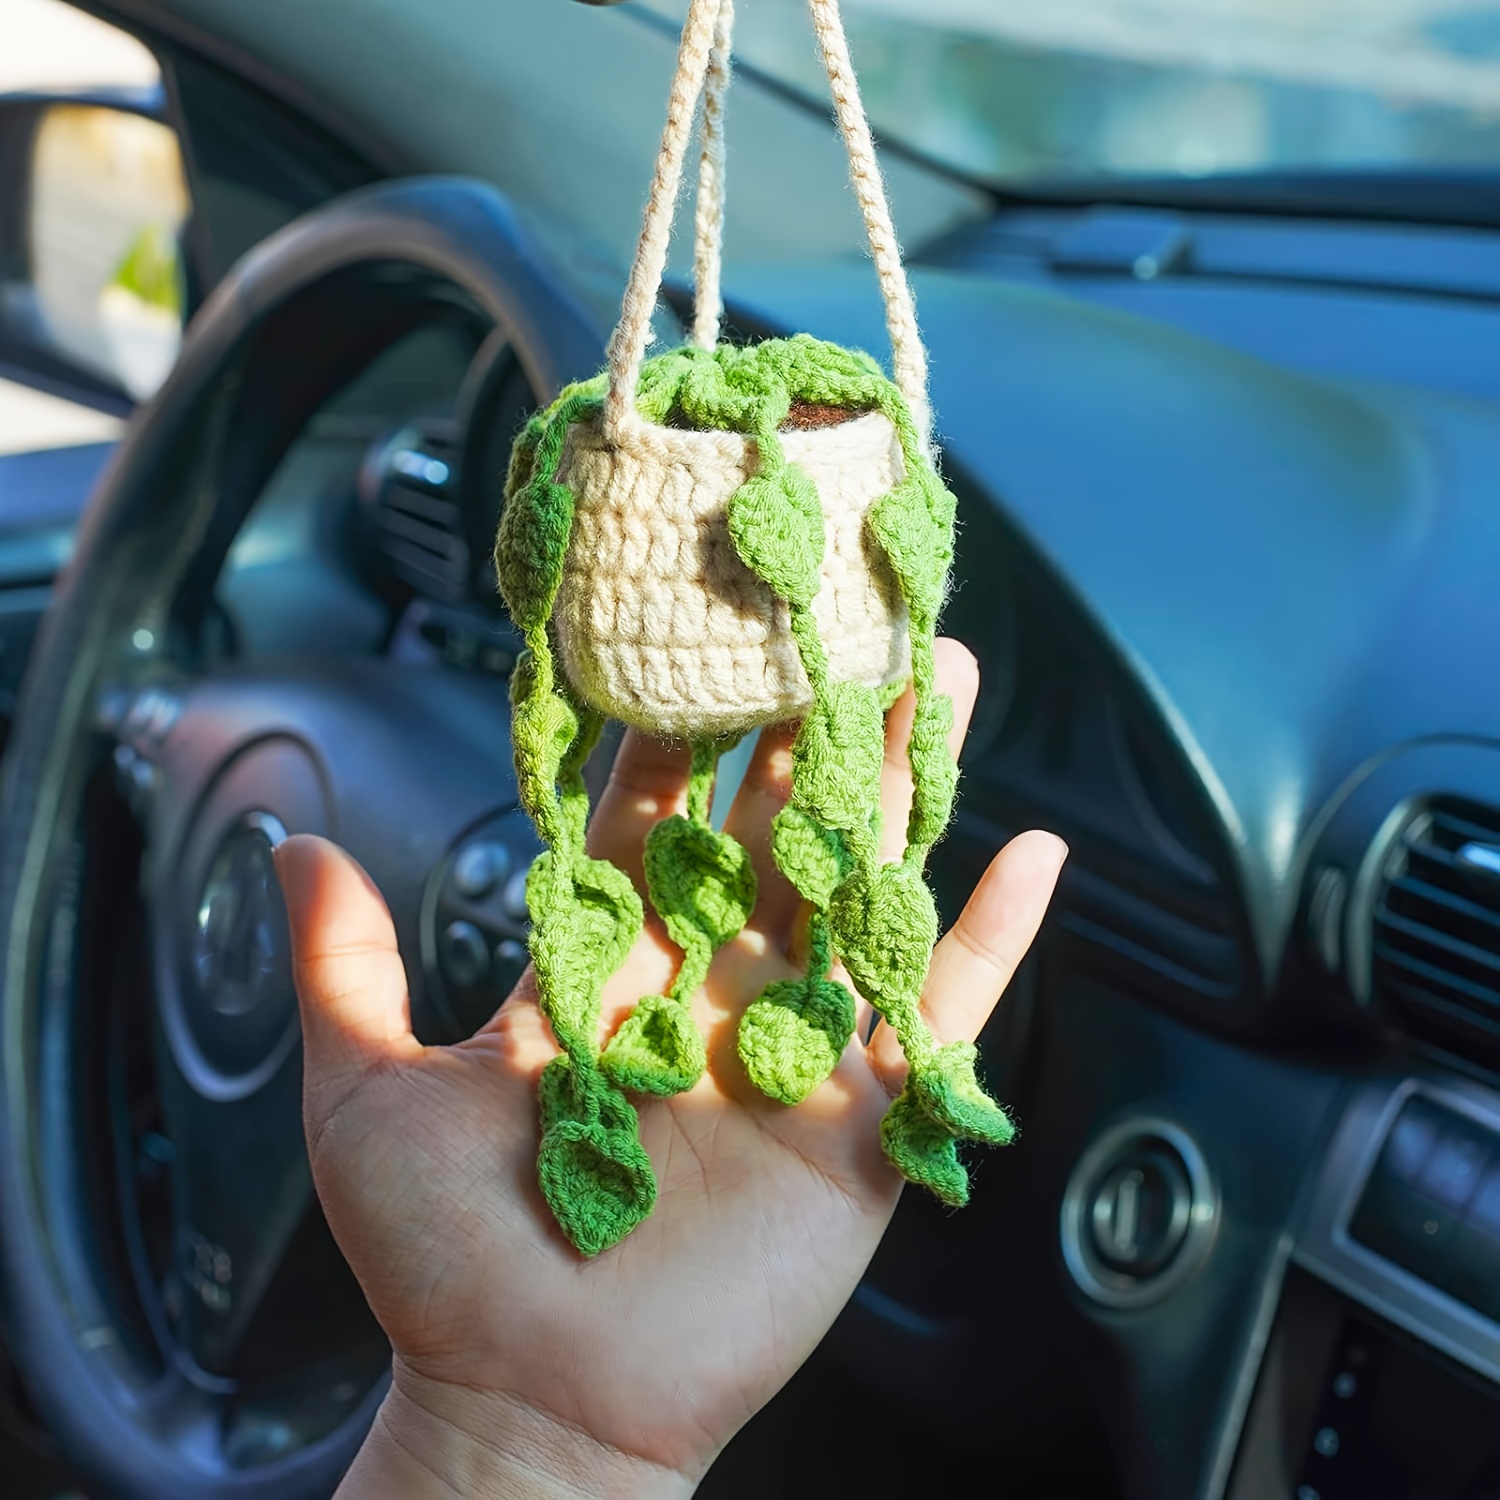 Cute Potted Plants Crochet Car Mirror Hanging Accessories for Car